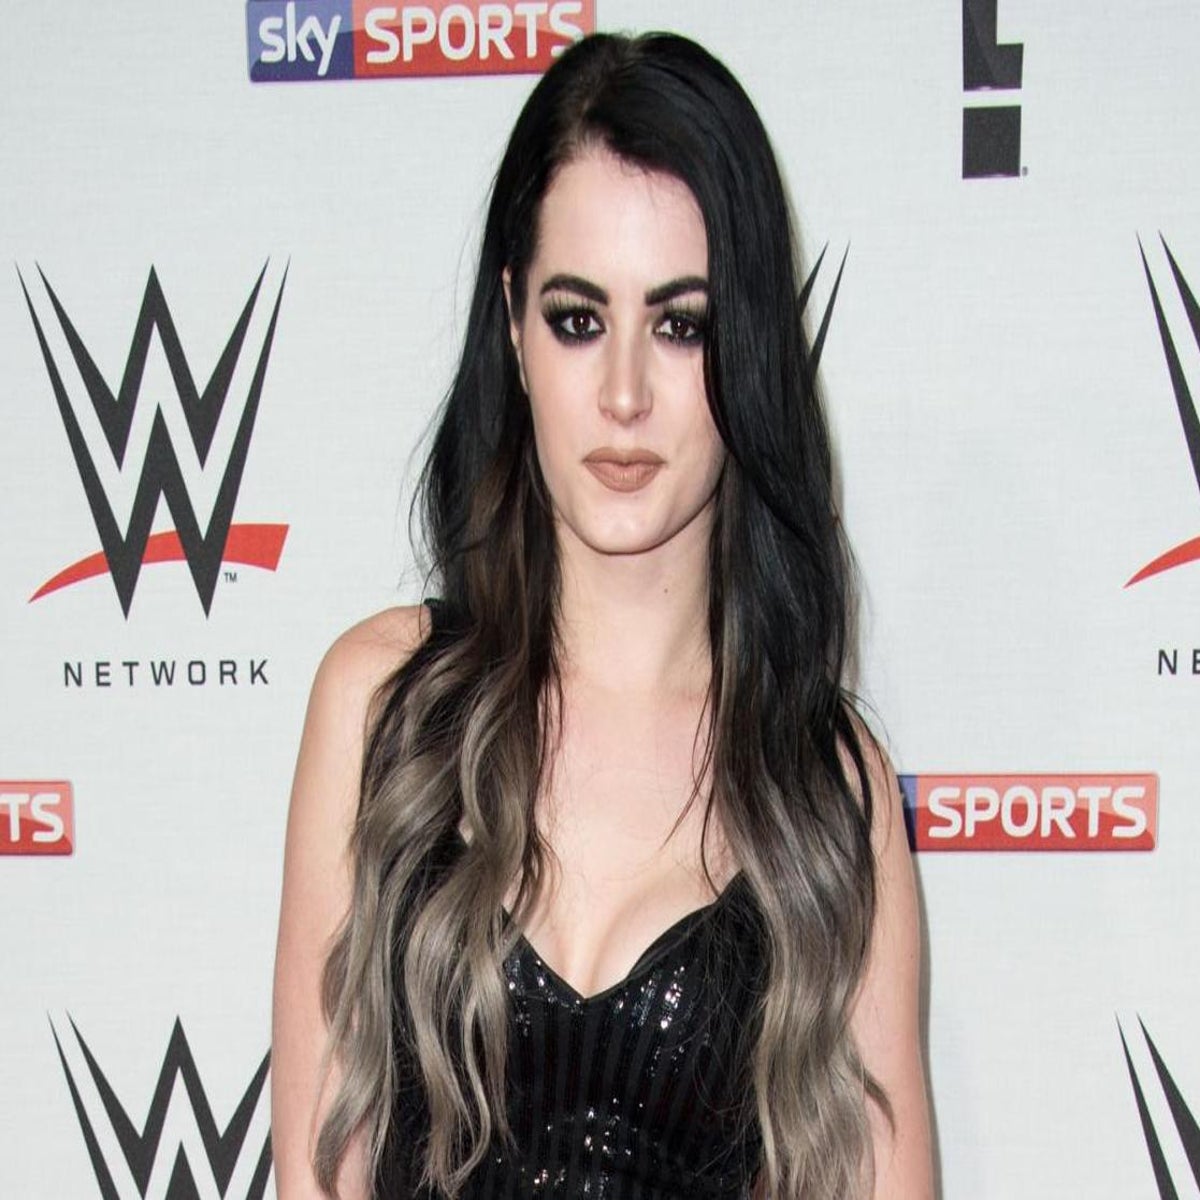 Wwe Star Ronda Rouse Porn Video - Paige sex tape leak caused WWE star to develop anorexia | The Independent